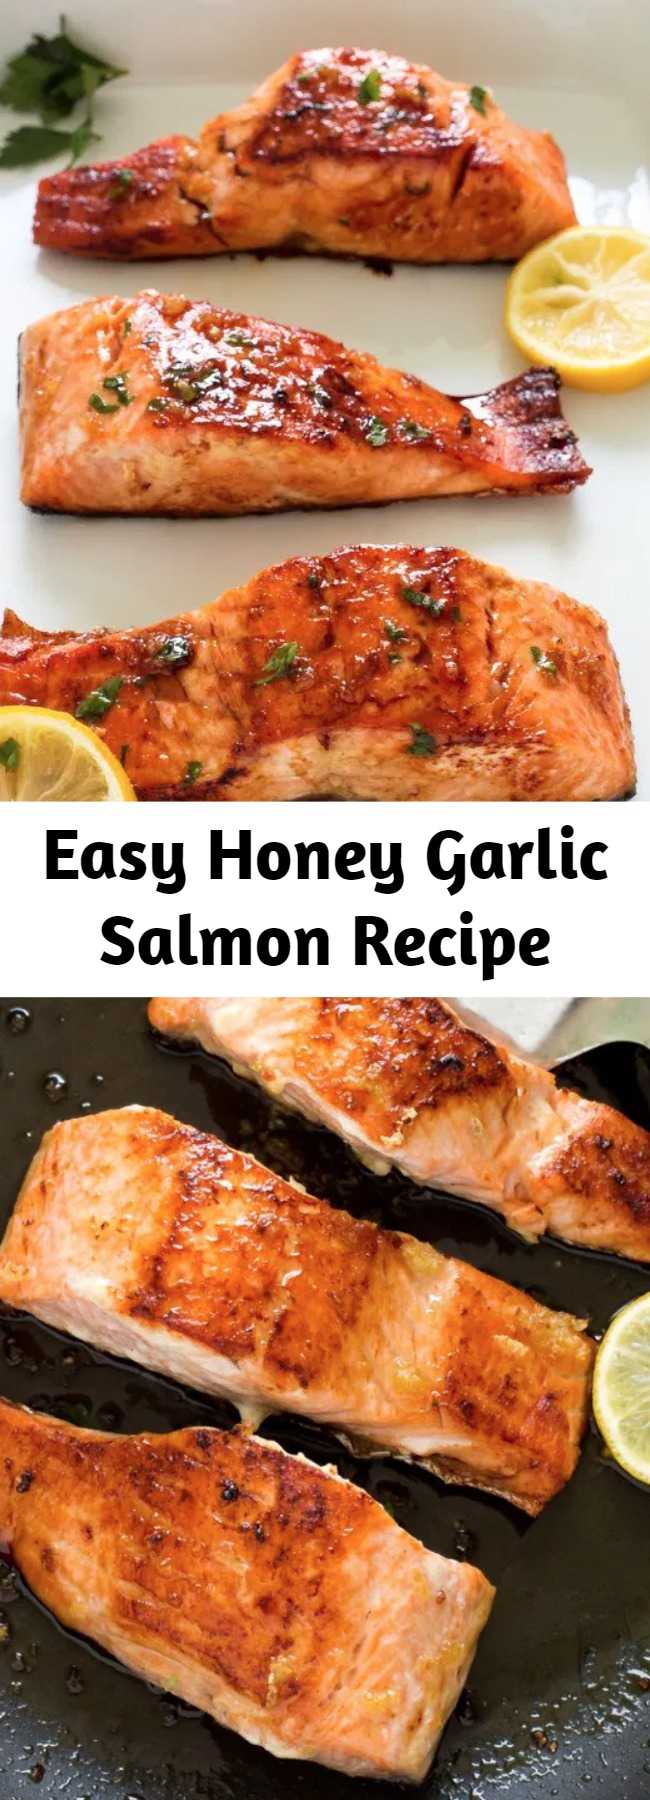 Easy Honey Garlic Salmon Recipe - Easy Honey Garlic Salmon. Pan fried and served with a sweet and sticky honey lemon glaze. Only 5 ingredients and ready in less than 20 minutes! This salmon is perfect for busy weeknight dinners! #recipe #honey #garlic #glazed #salmon #seafood